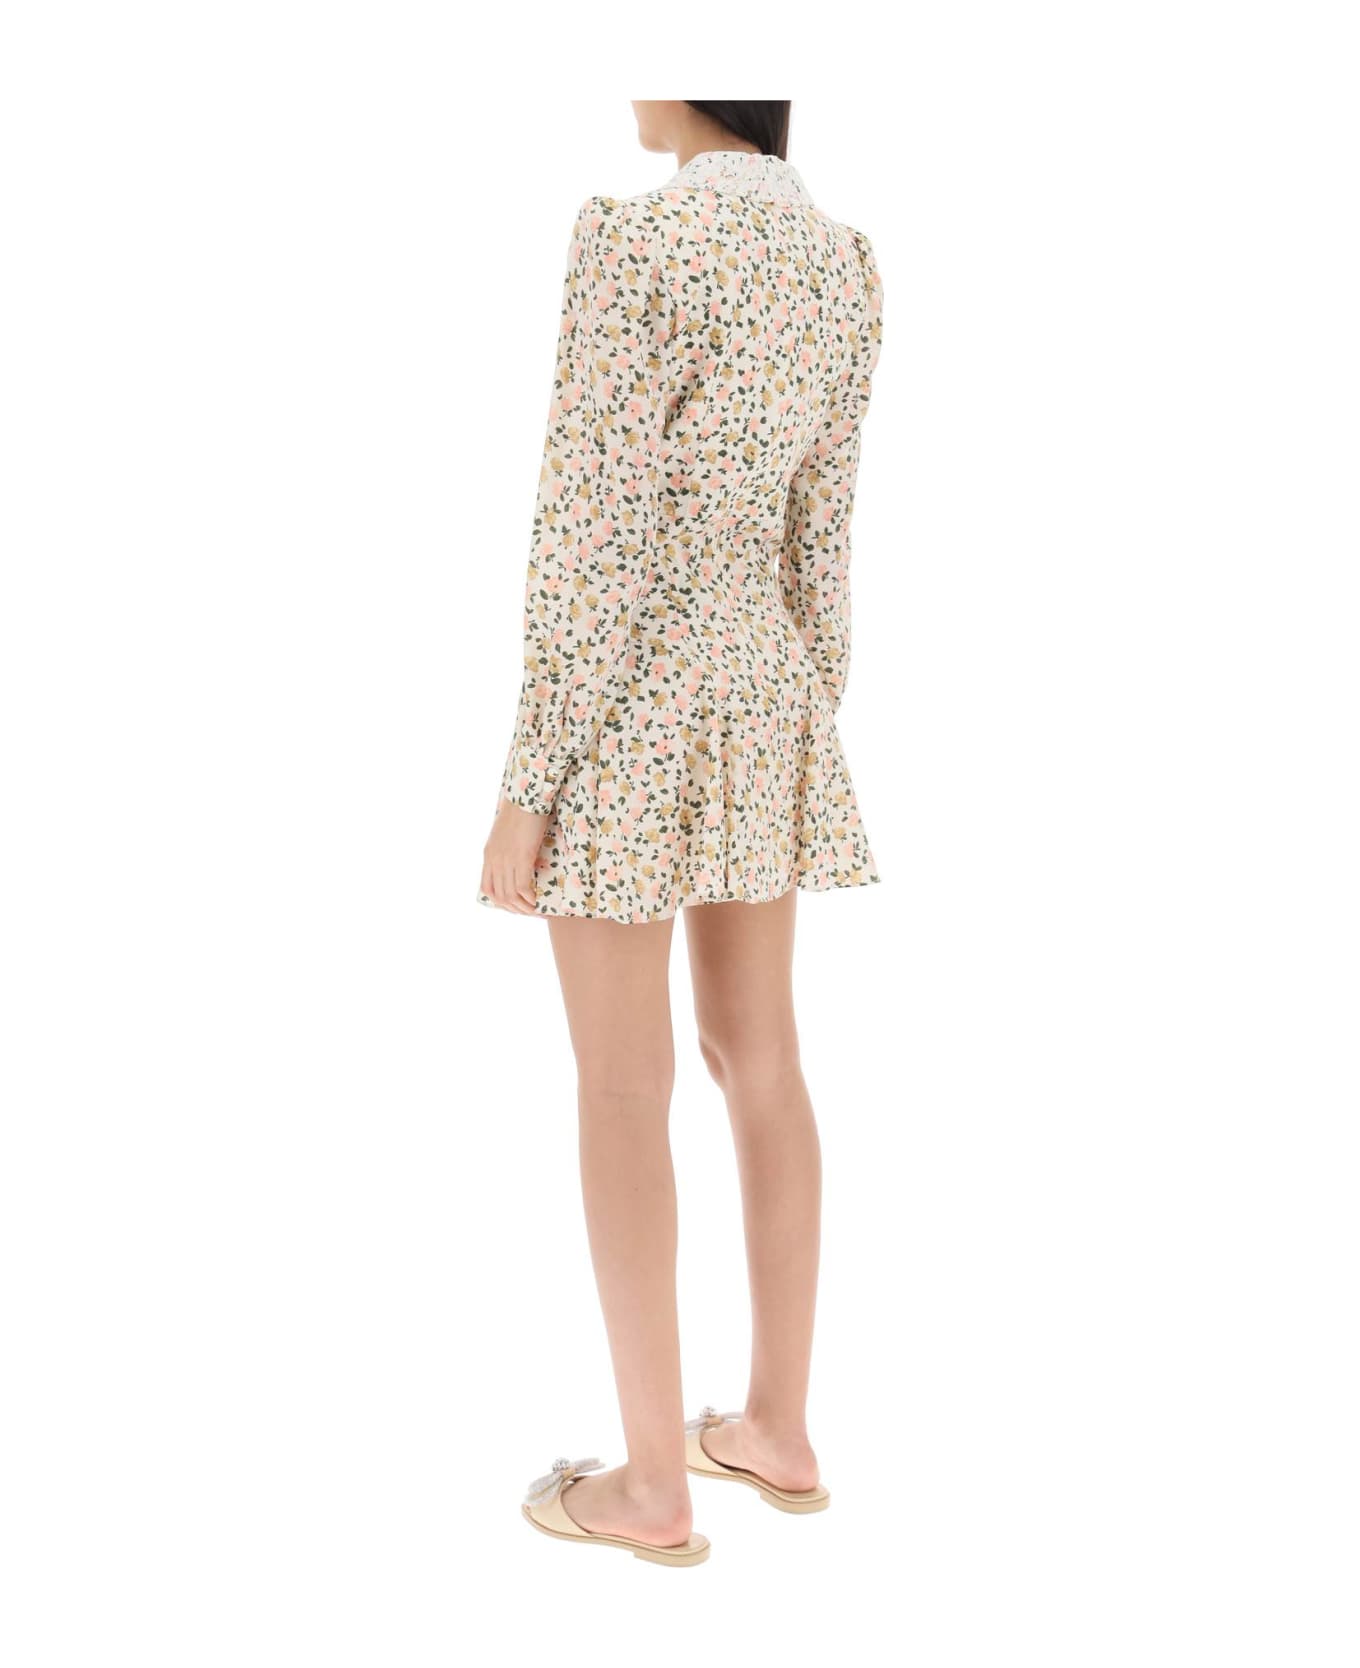 Alessandra Rich Mini Dress With Lace Collar - PINK MULTI (White)